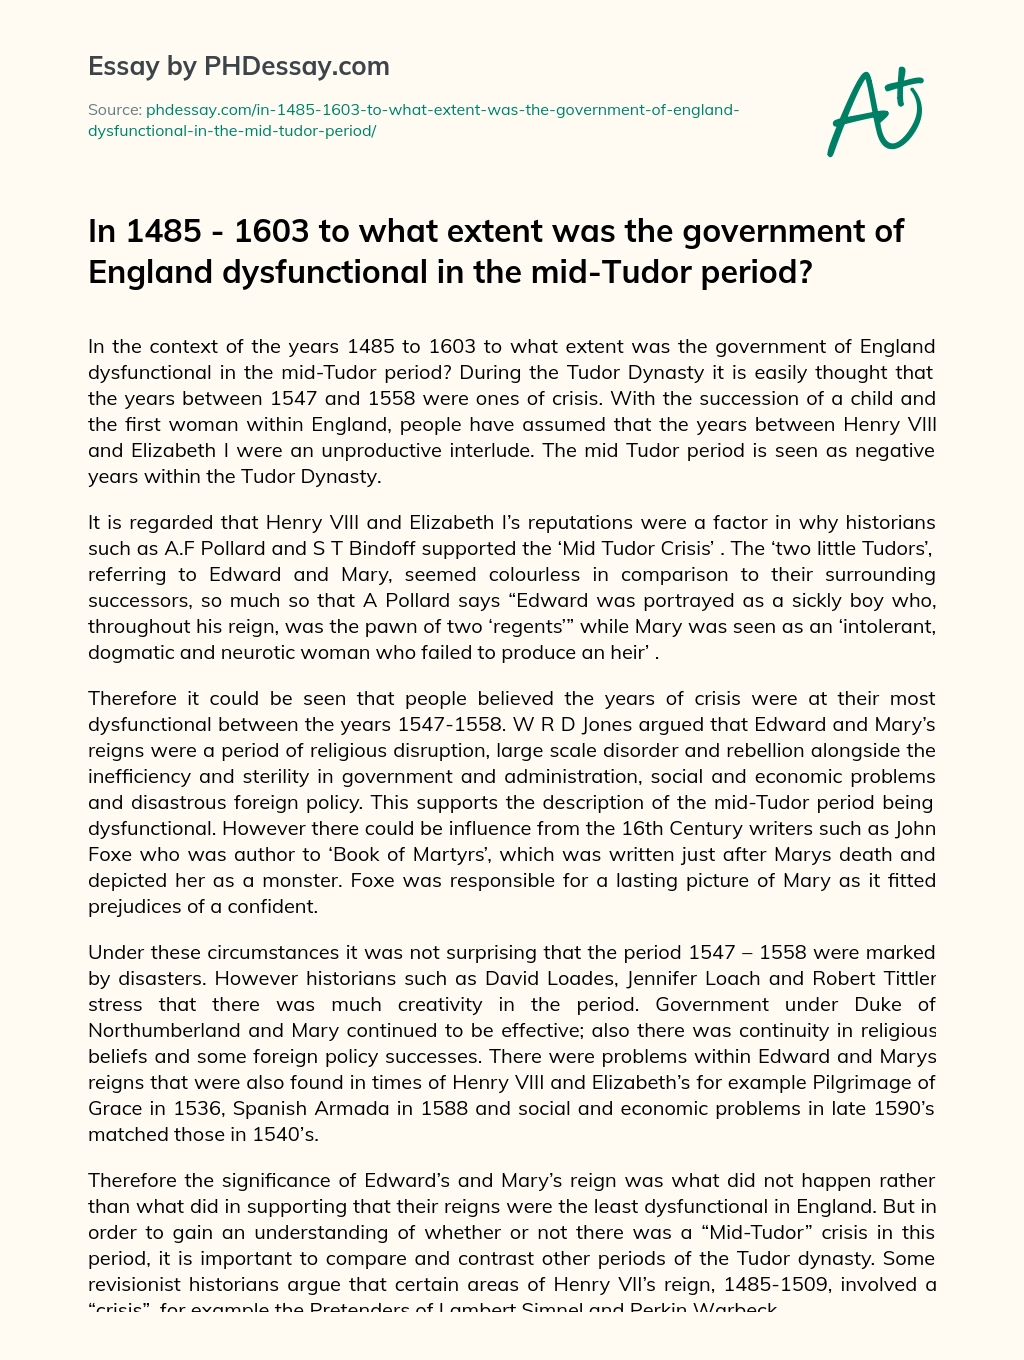 In 1485 – 1603 to what extent was the government of England dysfunctional in the mid-Tudor period? essay